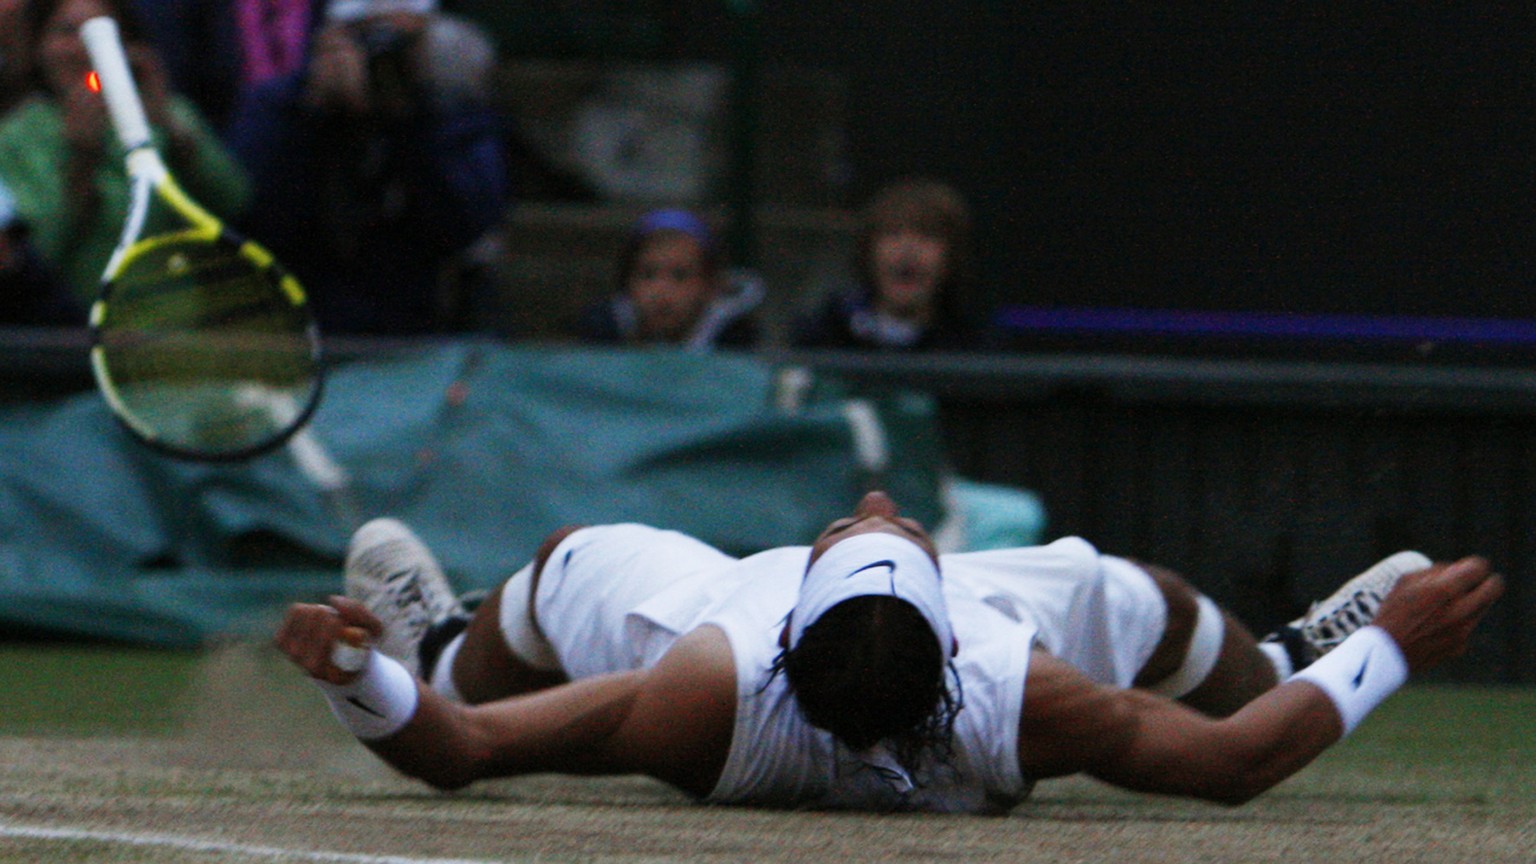 Spain&#039;s Rafael Nadal falls to the court after defeating Roger Federer, in the Men&#039;s Singles final on the Centre Court at Wimbledon, Sunday, July 6, 2008. (AP Photo/Alessia Pierdomenico, pool ...